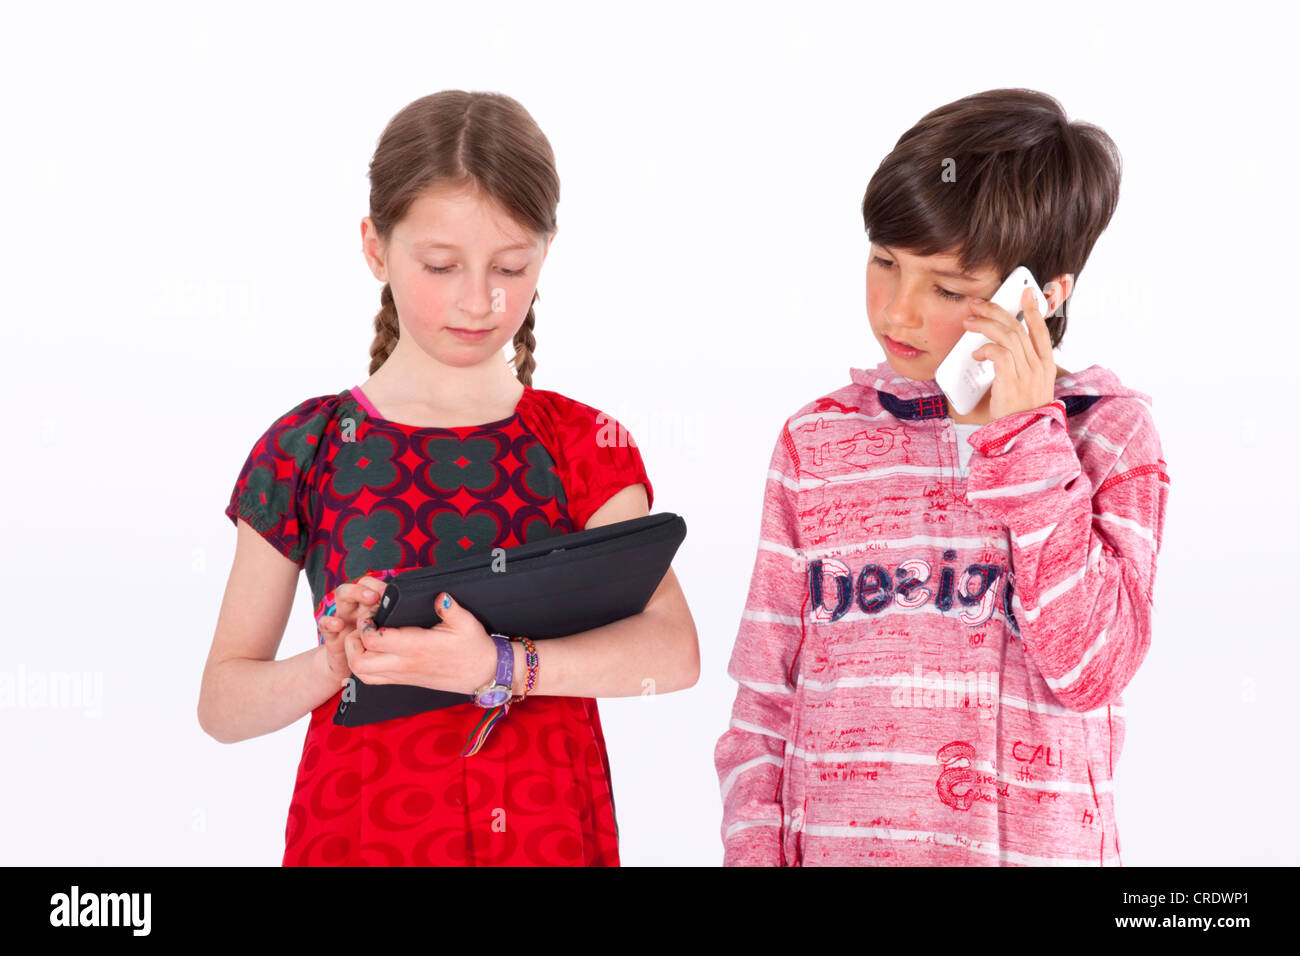 Girl and boy, 9 years, with mobile phone and iPad Stock Photo